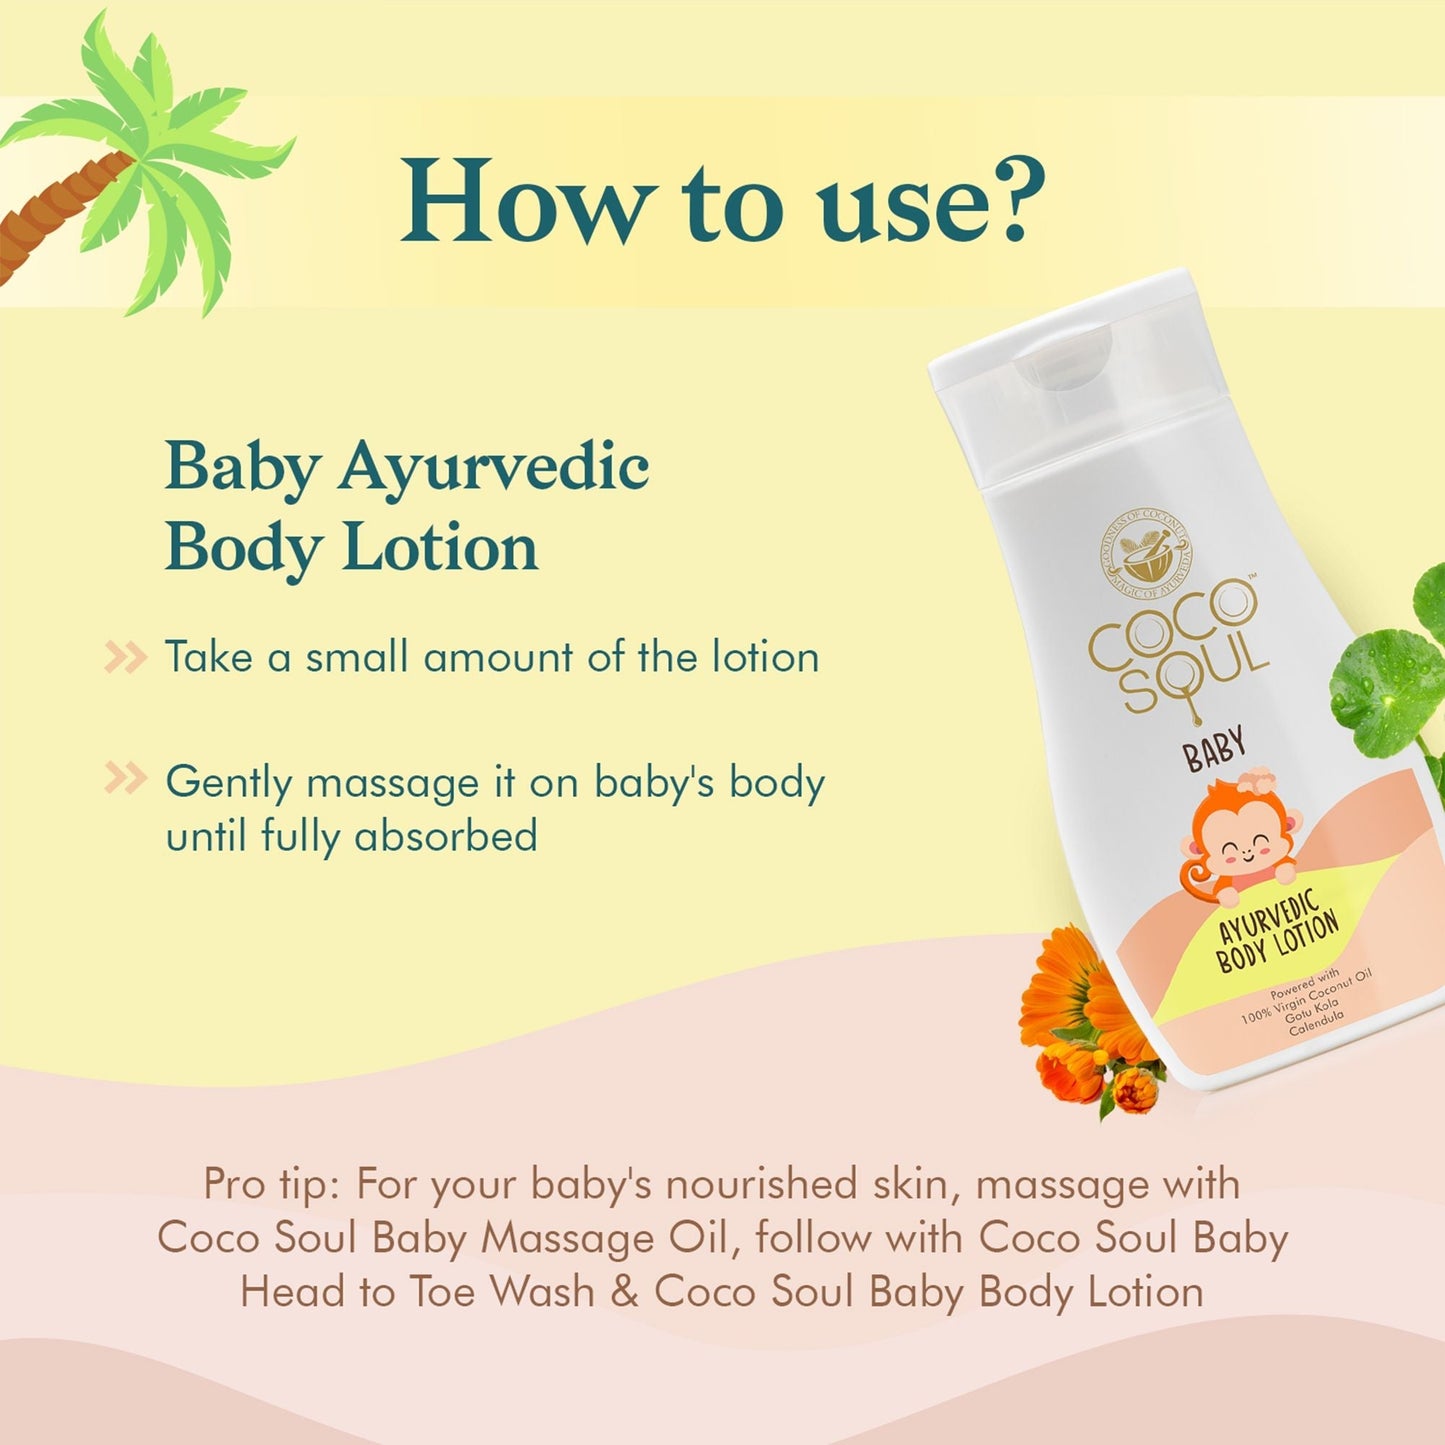 Baby Ayurvedic Body Lotion  From the makers of Parachute Advansed  200ml